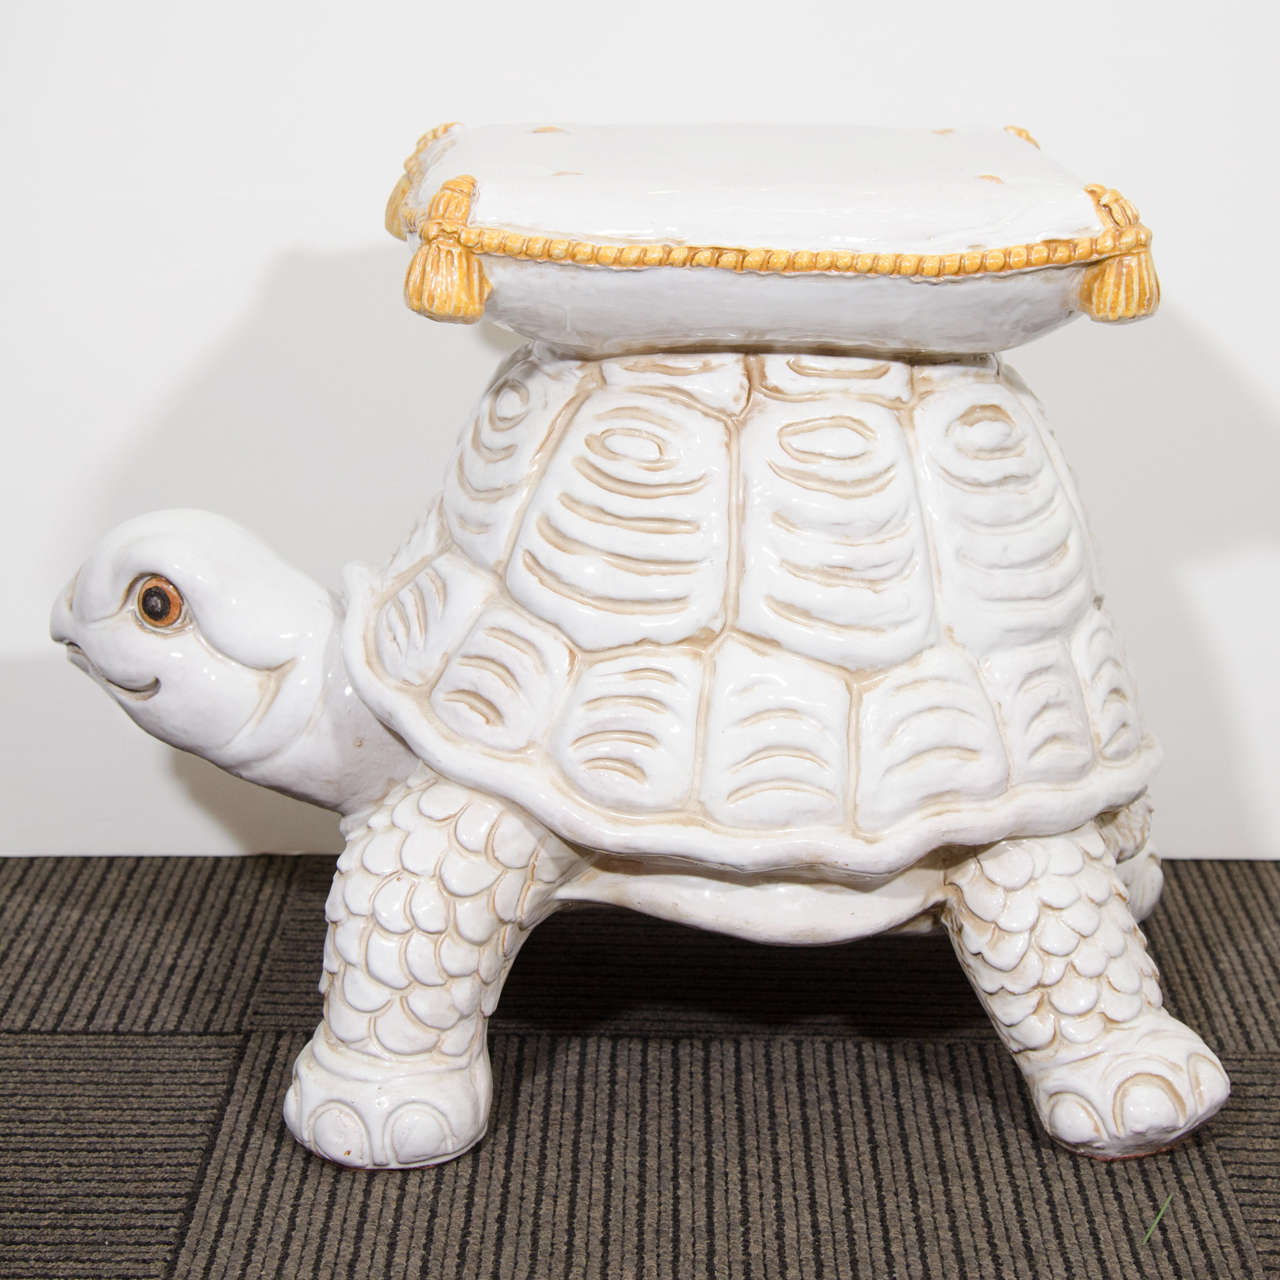 A vintage whimsical Italian ceramic garden seat in the shape of a turtle. 

Good vintage condition with age appropriate wear.